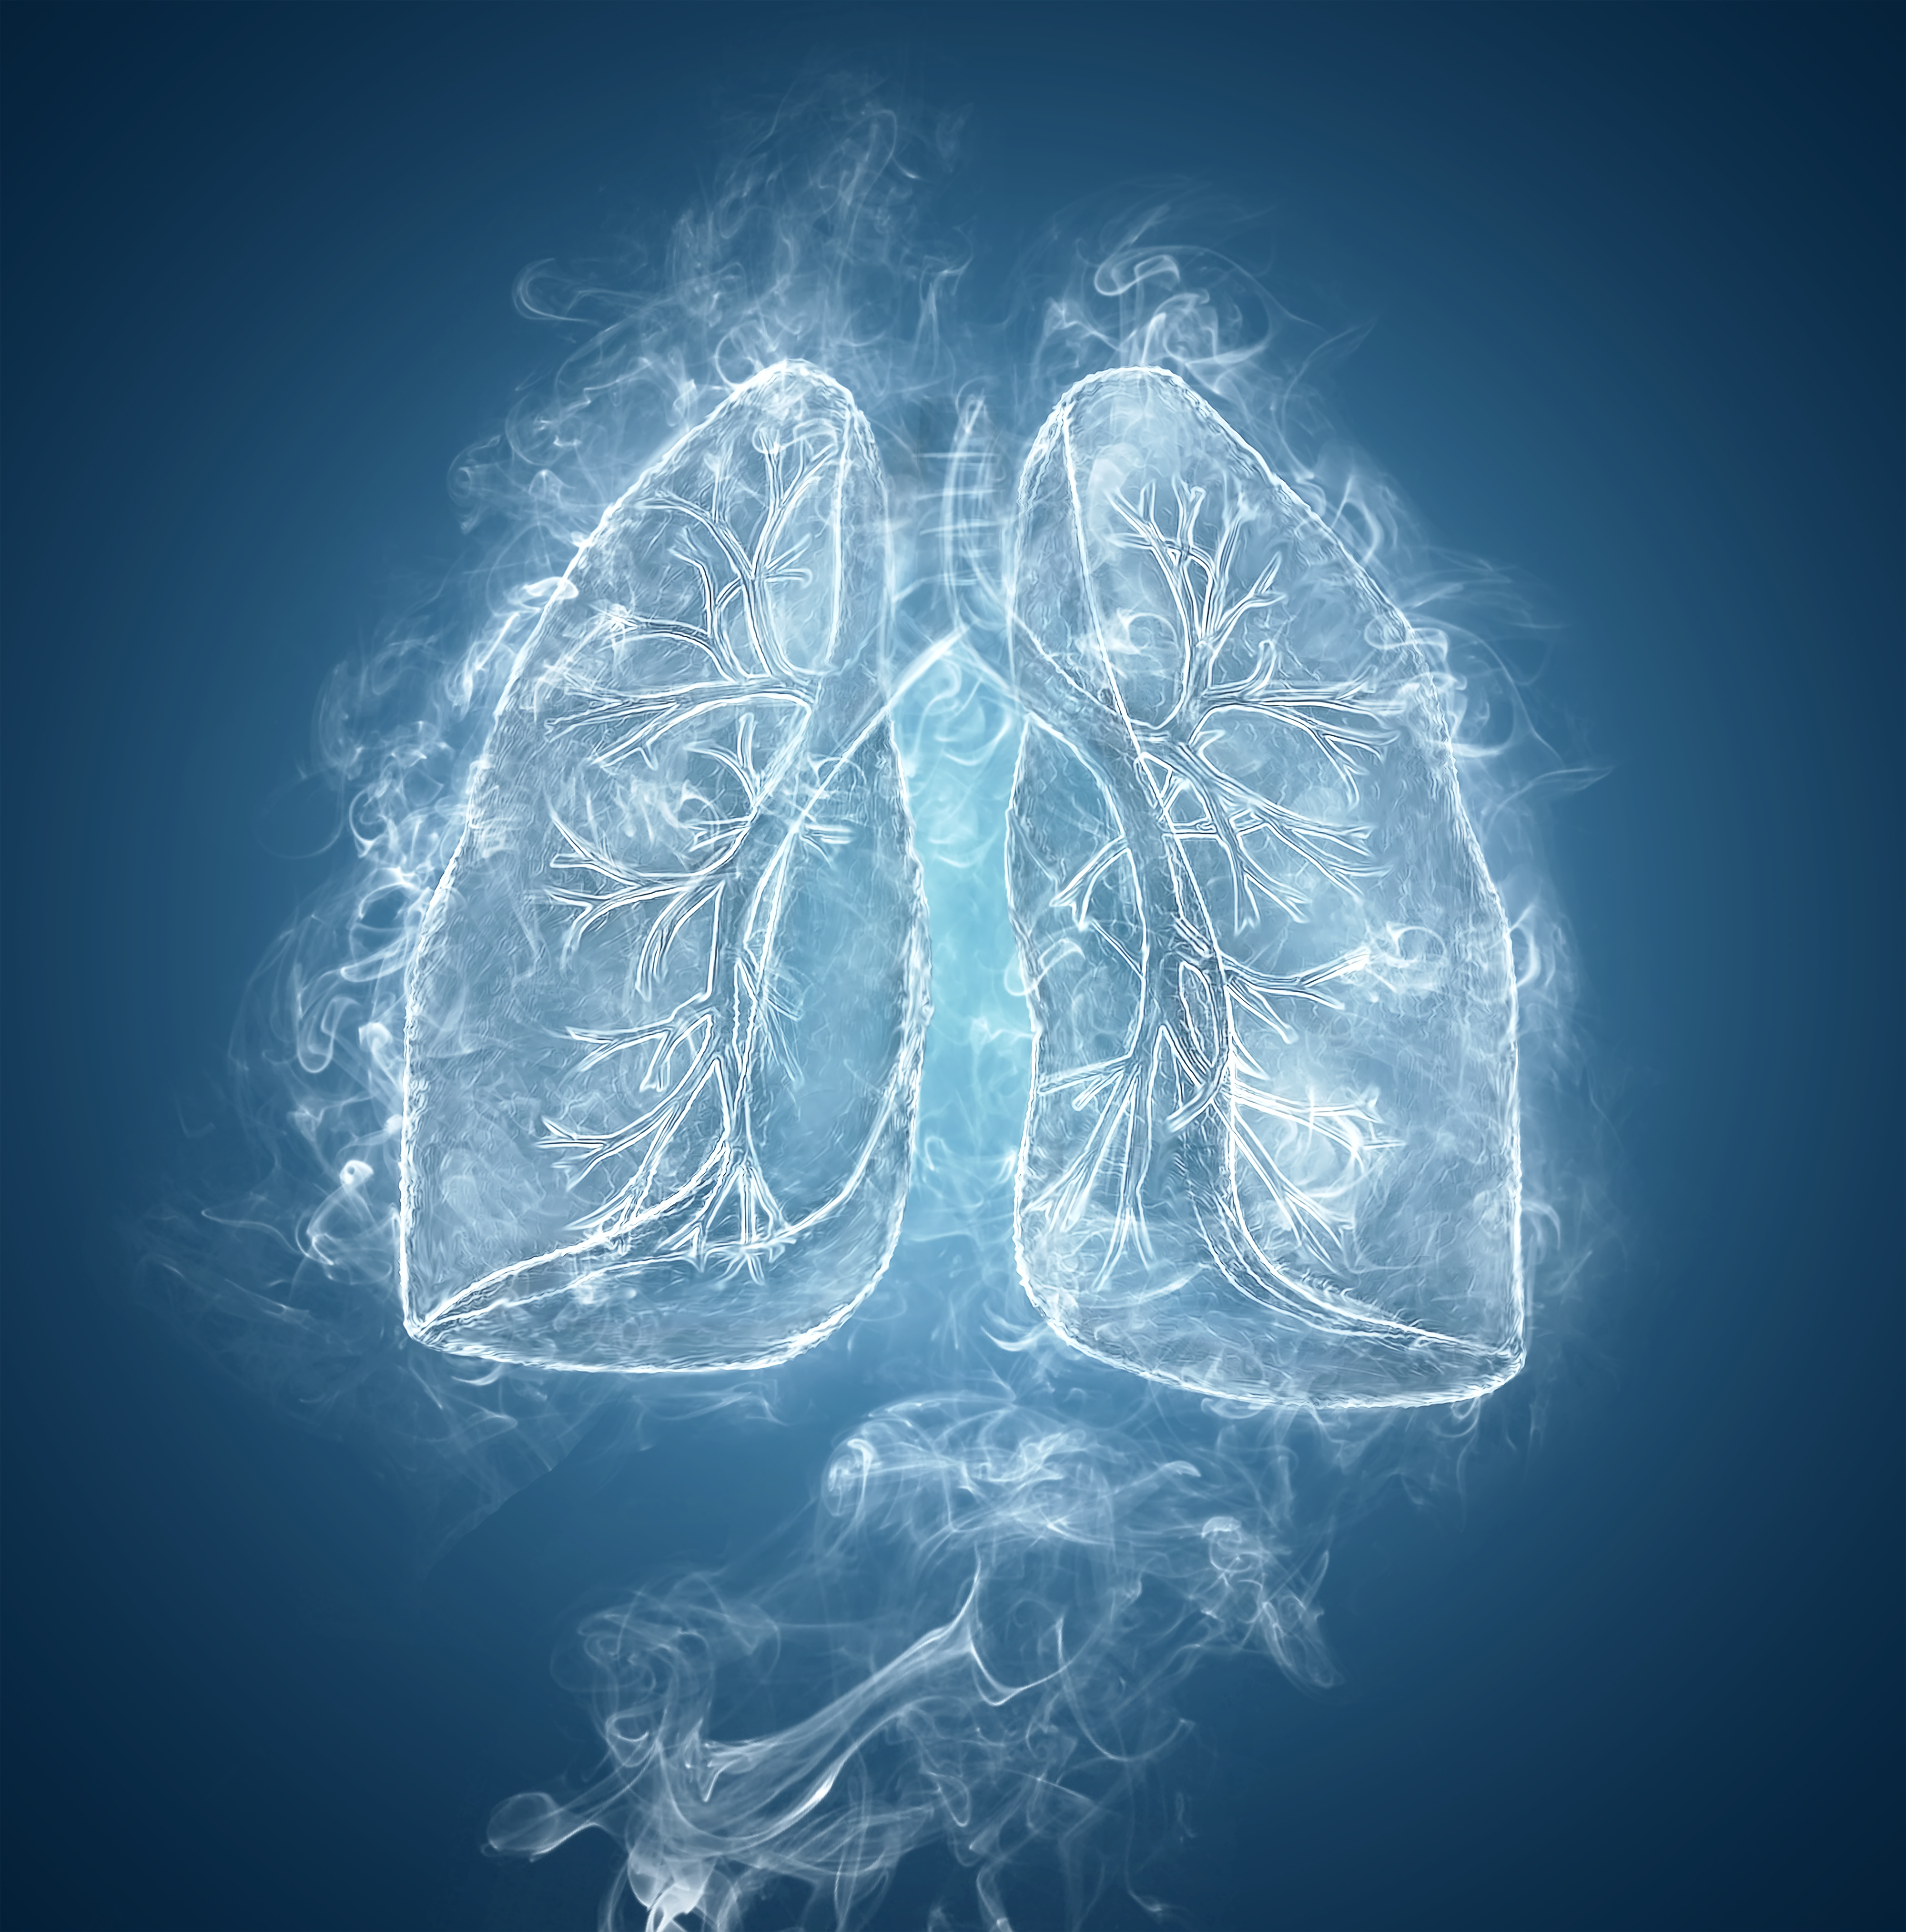 FDA Approves Boehringer Ingelheim’s Stiolto Respimat as Maintenance Treatment for Patients With COPD